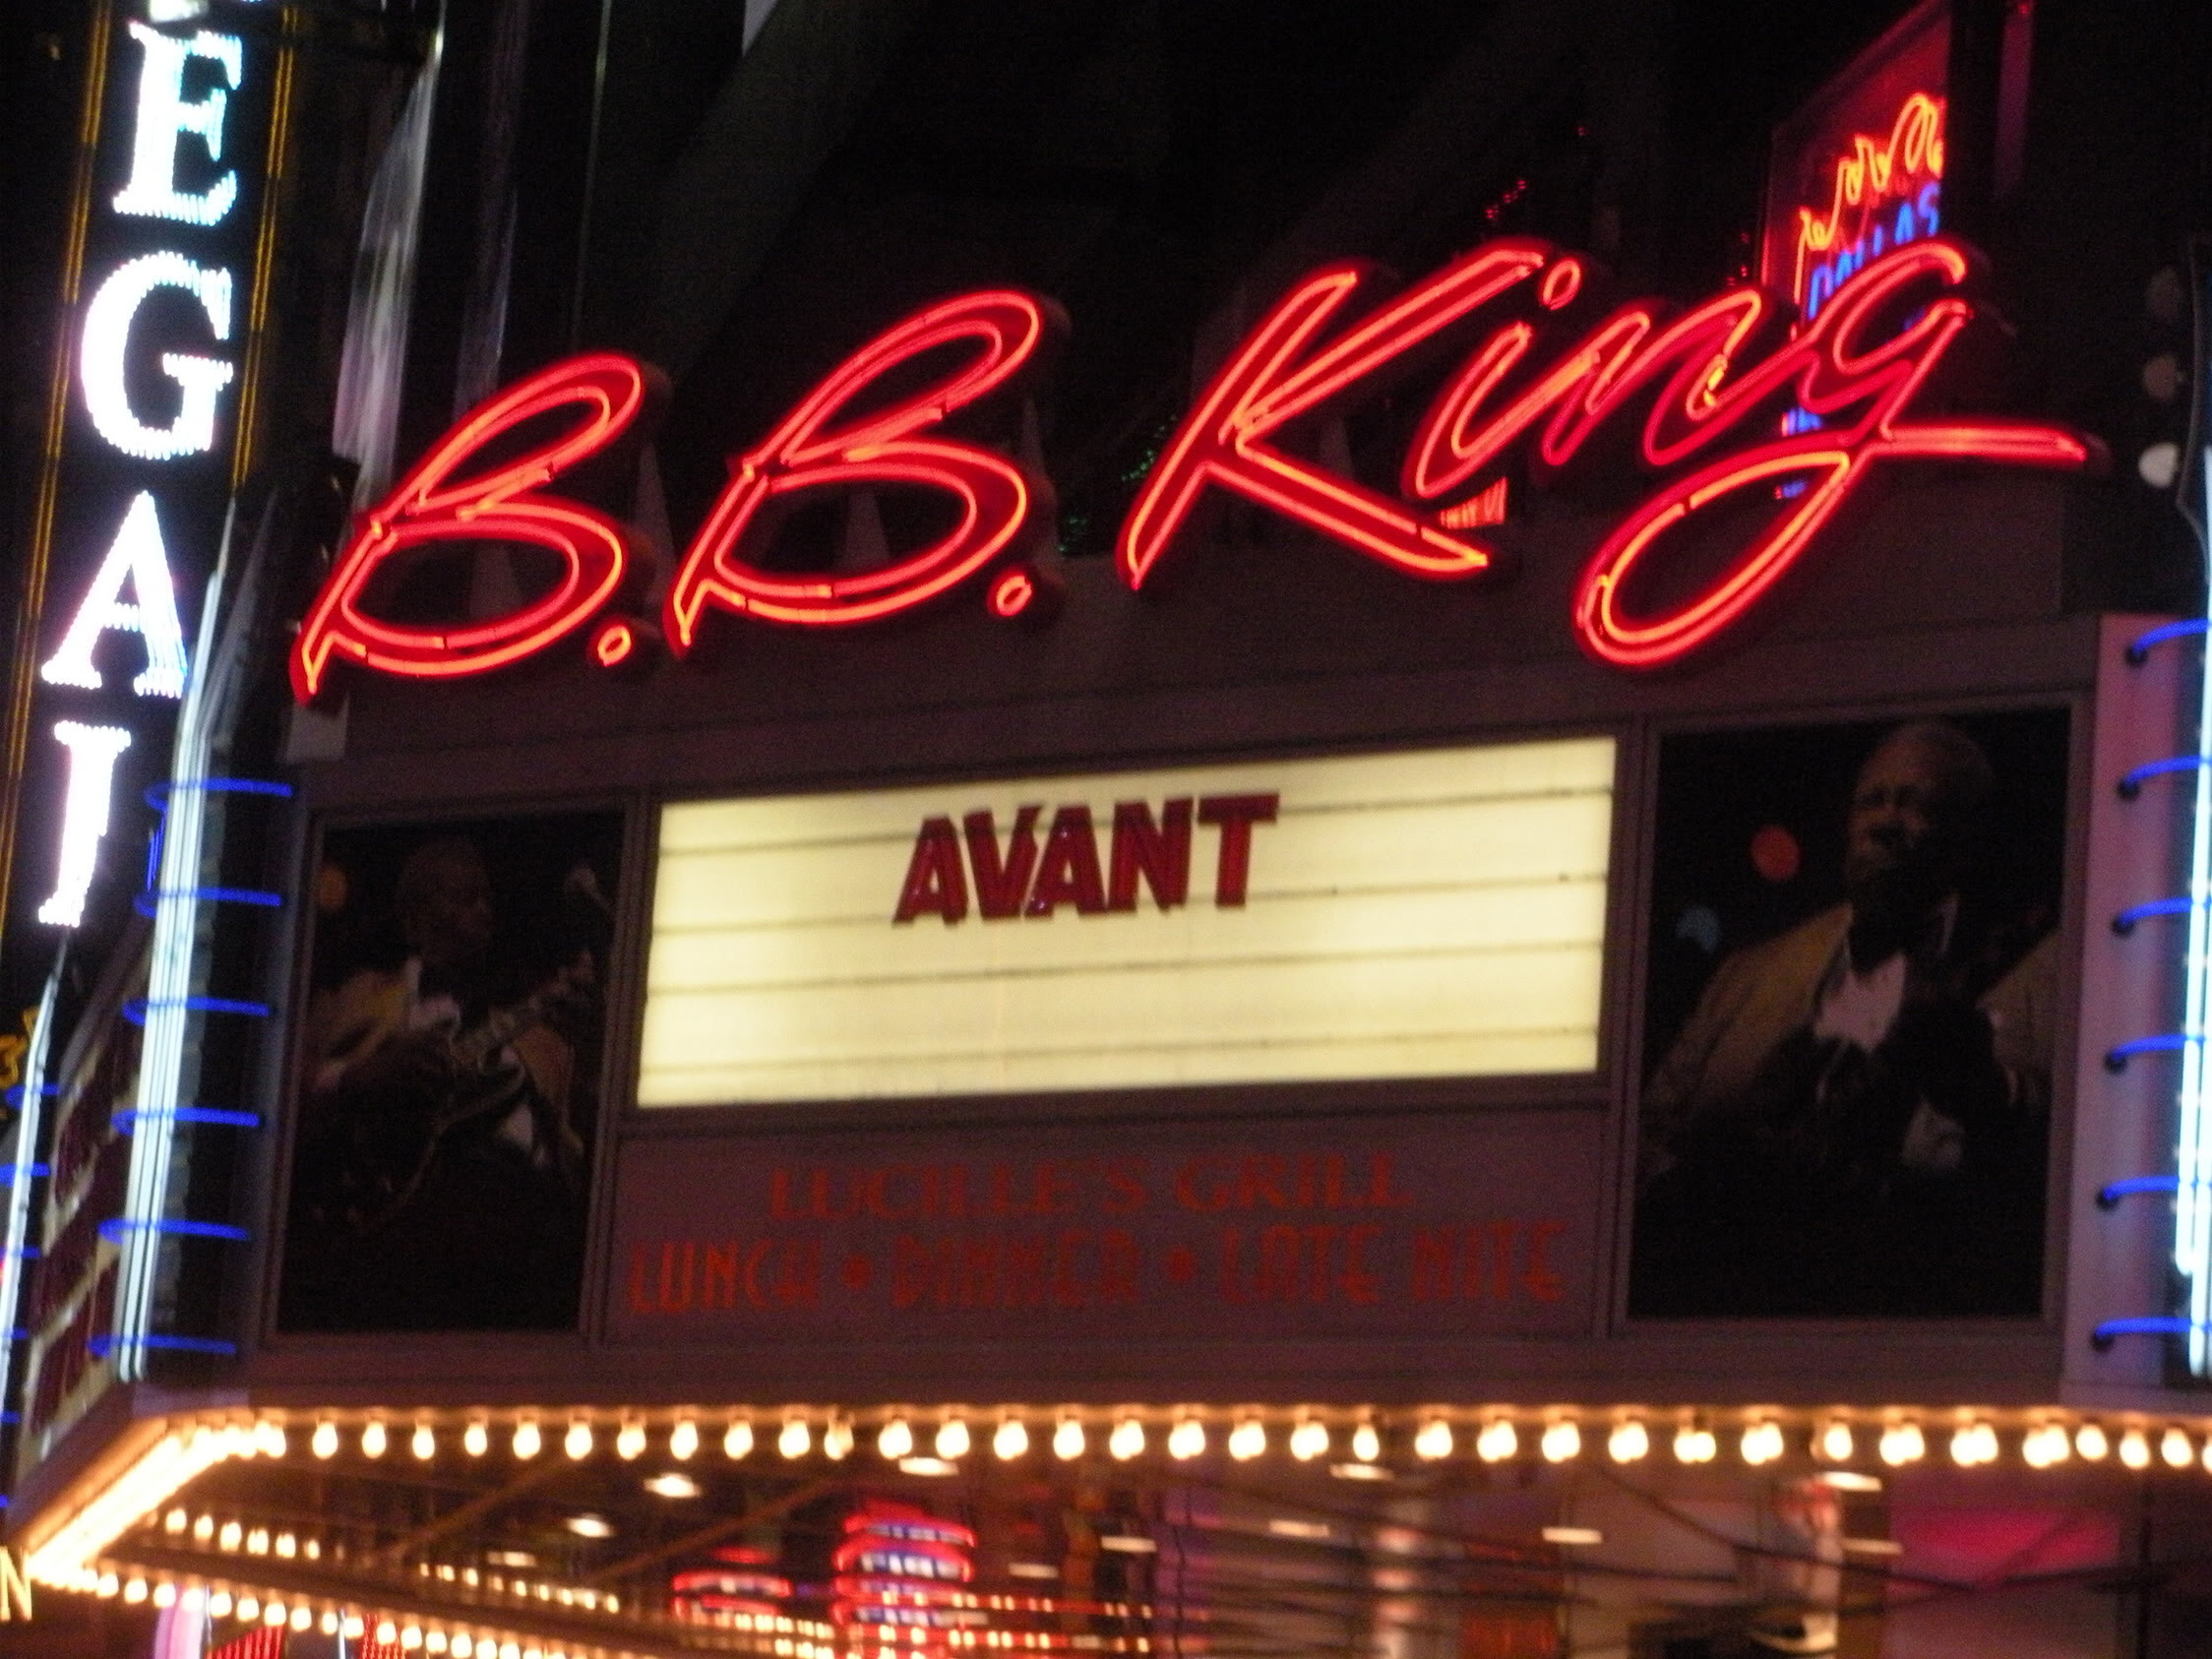 Avant Live Concert Footage at B.B. Kings in NYC 12/10/10 (Part 1 of 2)